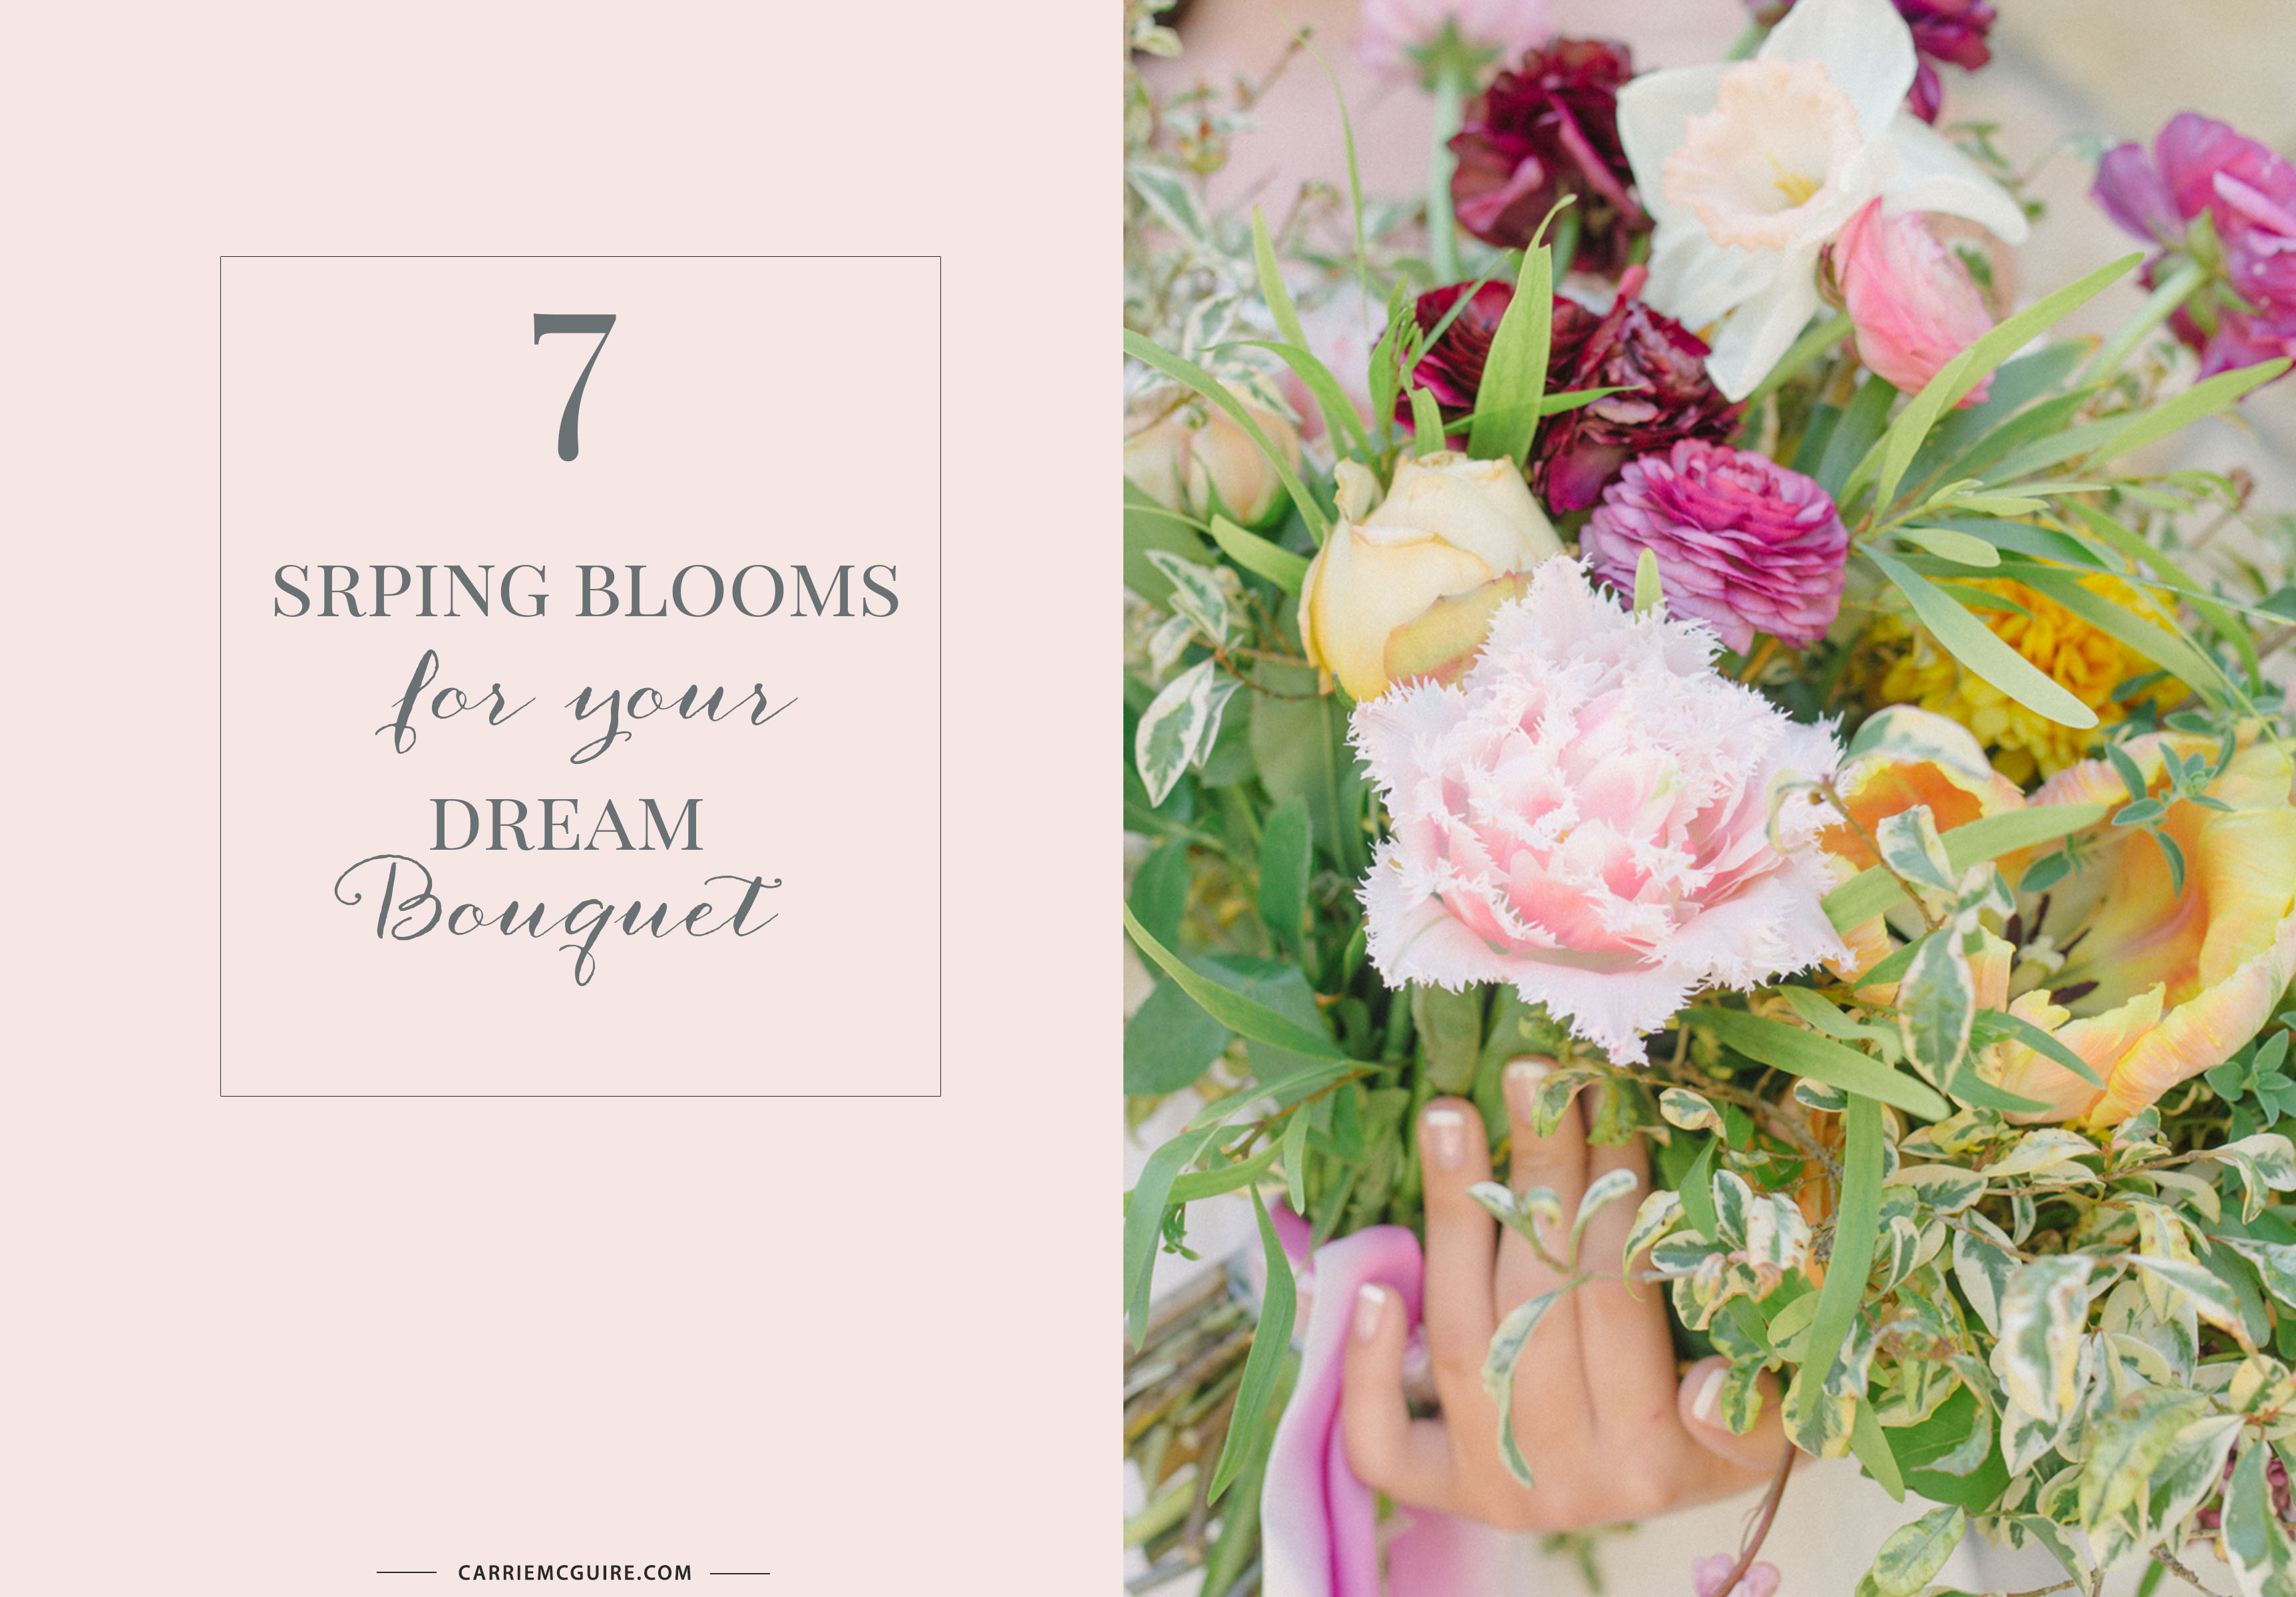 7 spring blooms for your dream bouquet FOR YOUR WEDDING